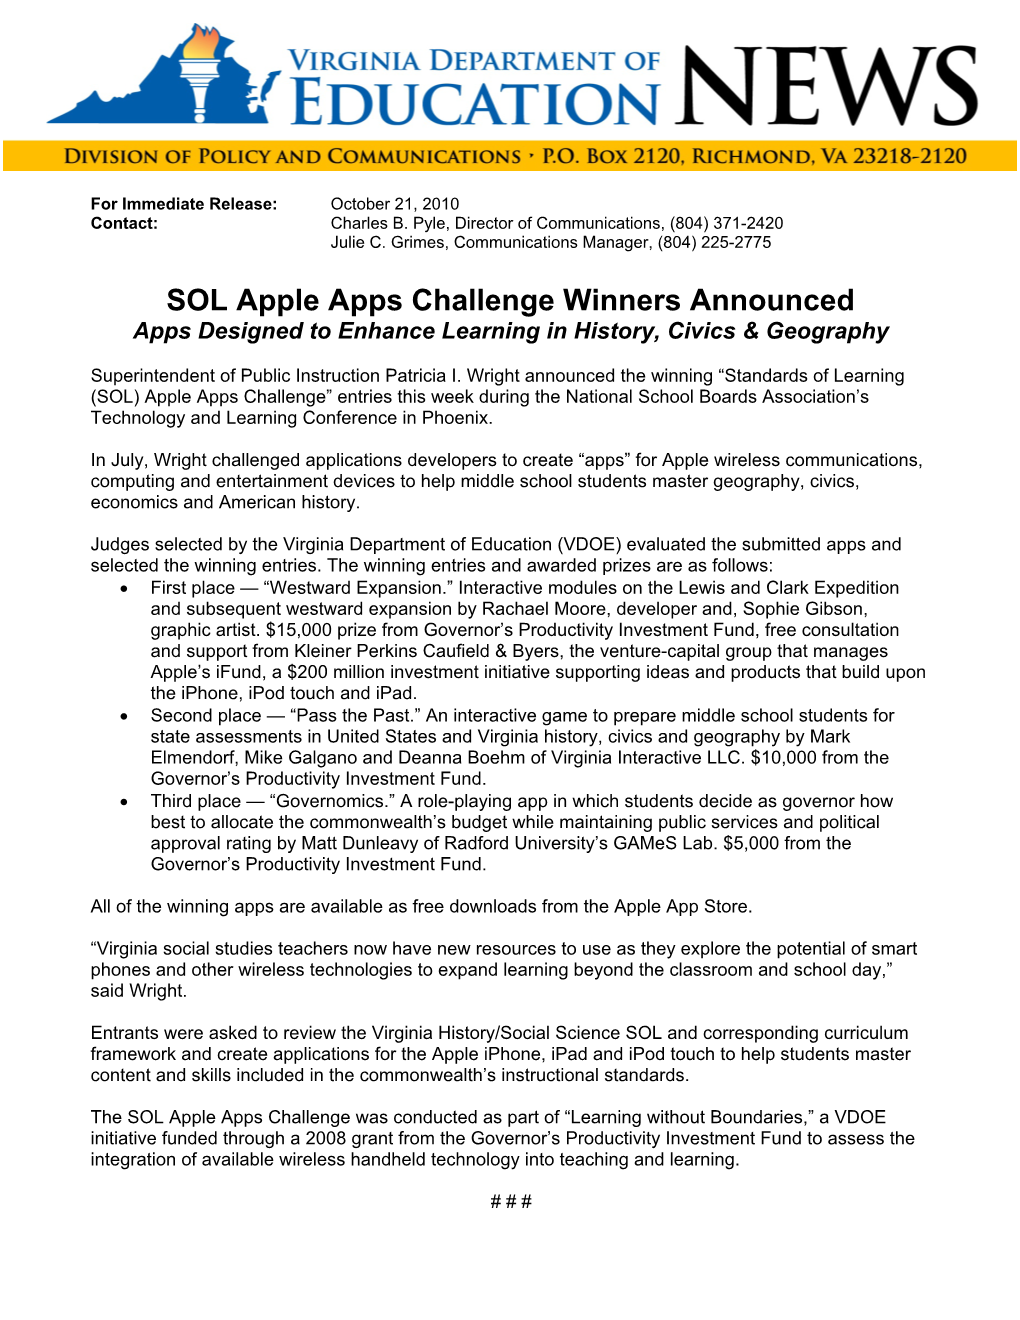 SOL Apple Apps Challenge Winners Announced Apps Designed to Enhance Learning in History, Civics & Geography